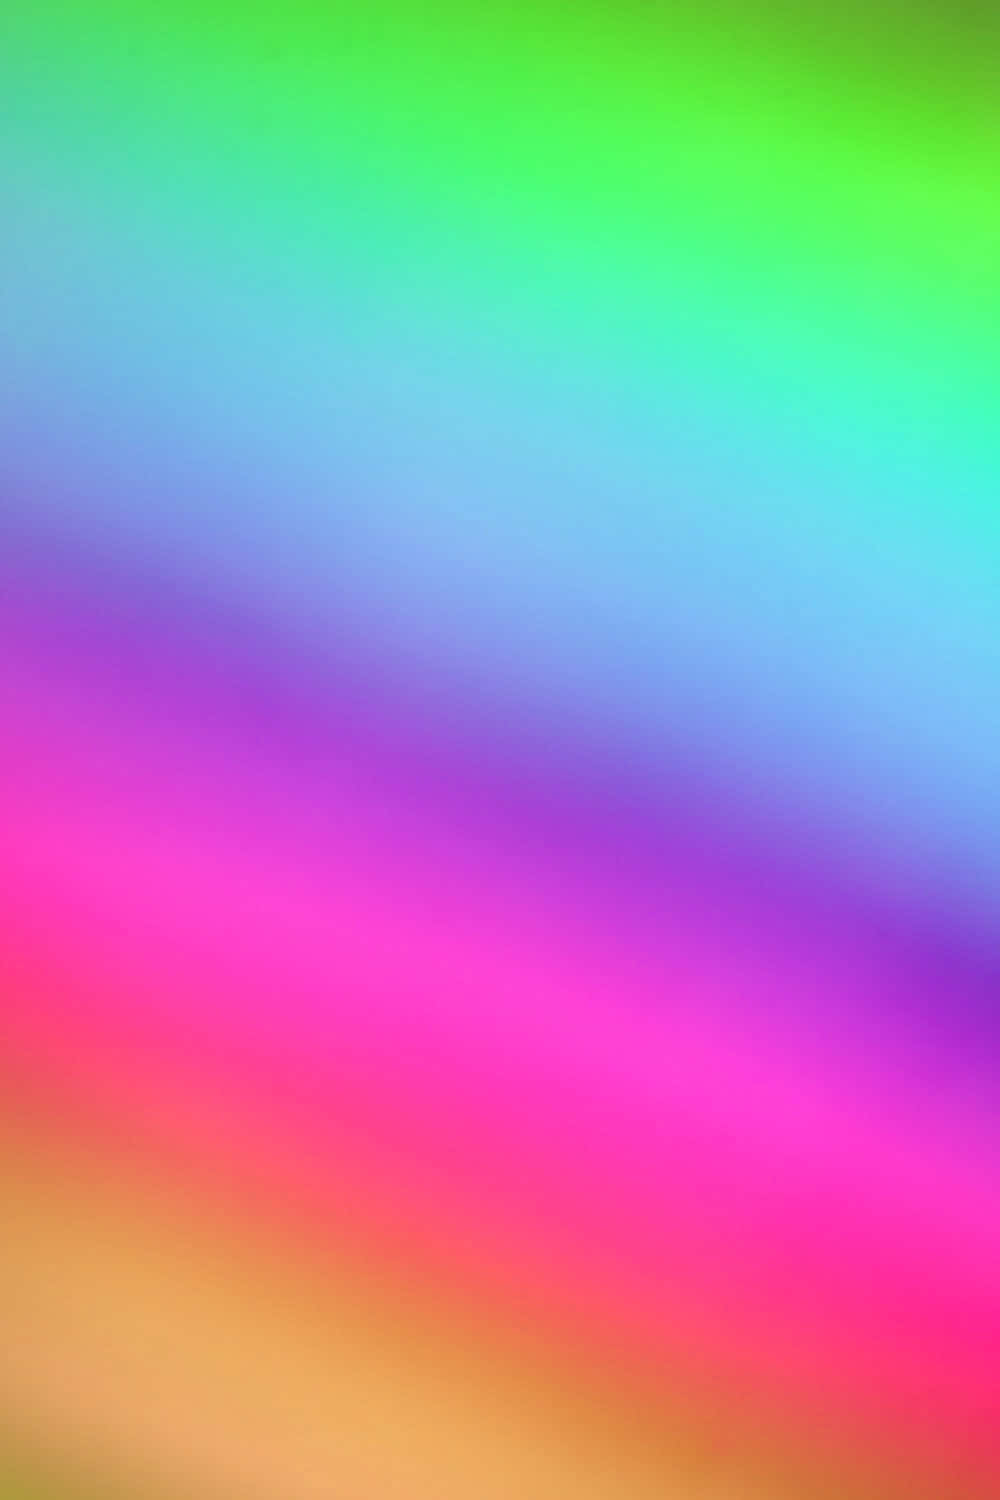 A Rainbow Colored Blurred Background